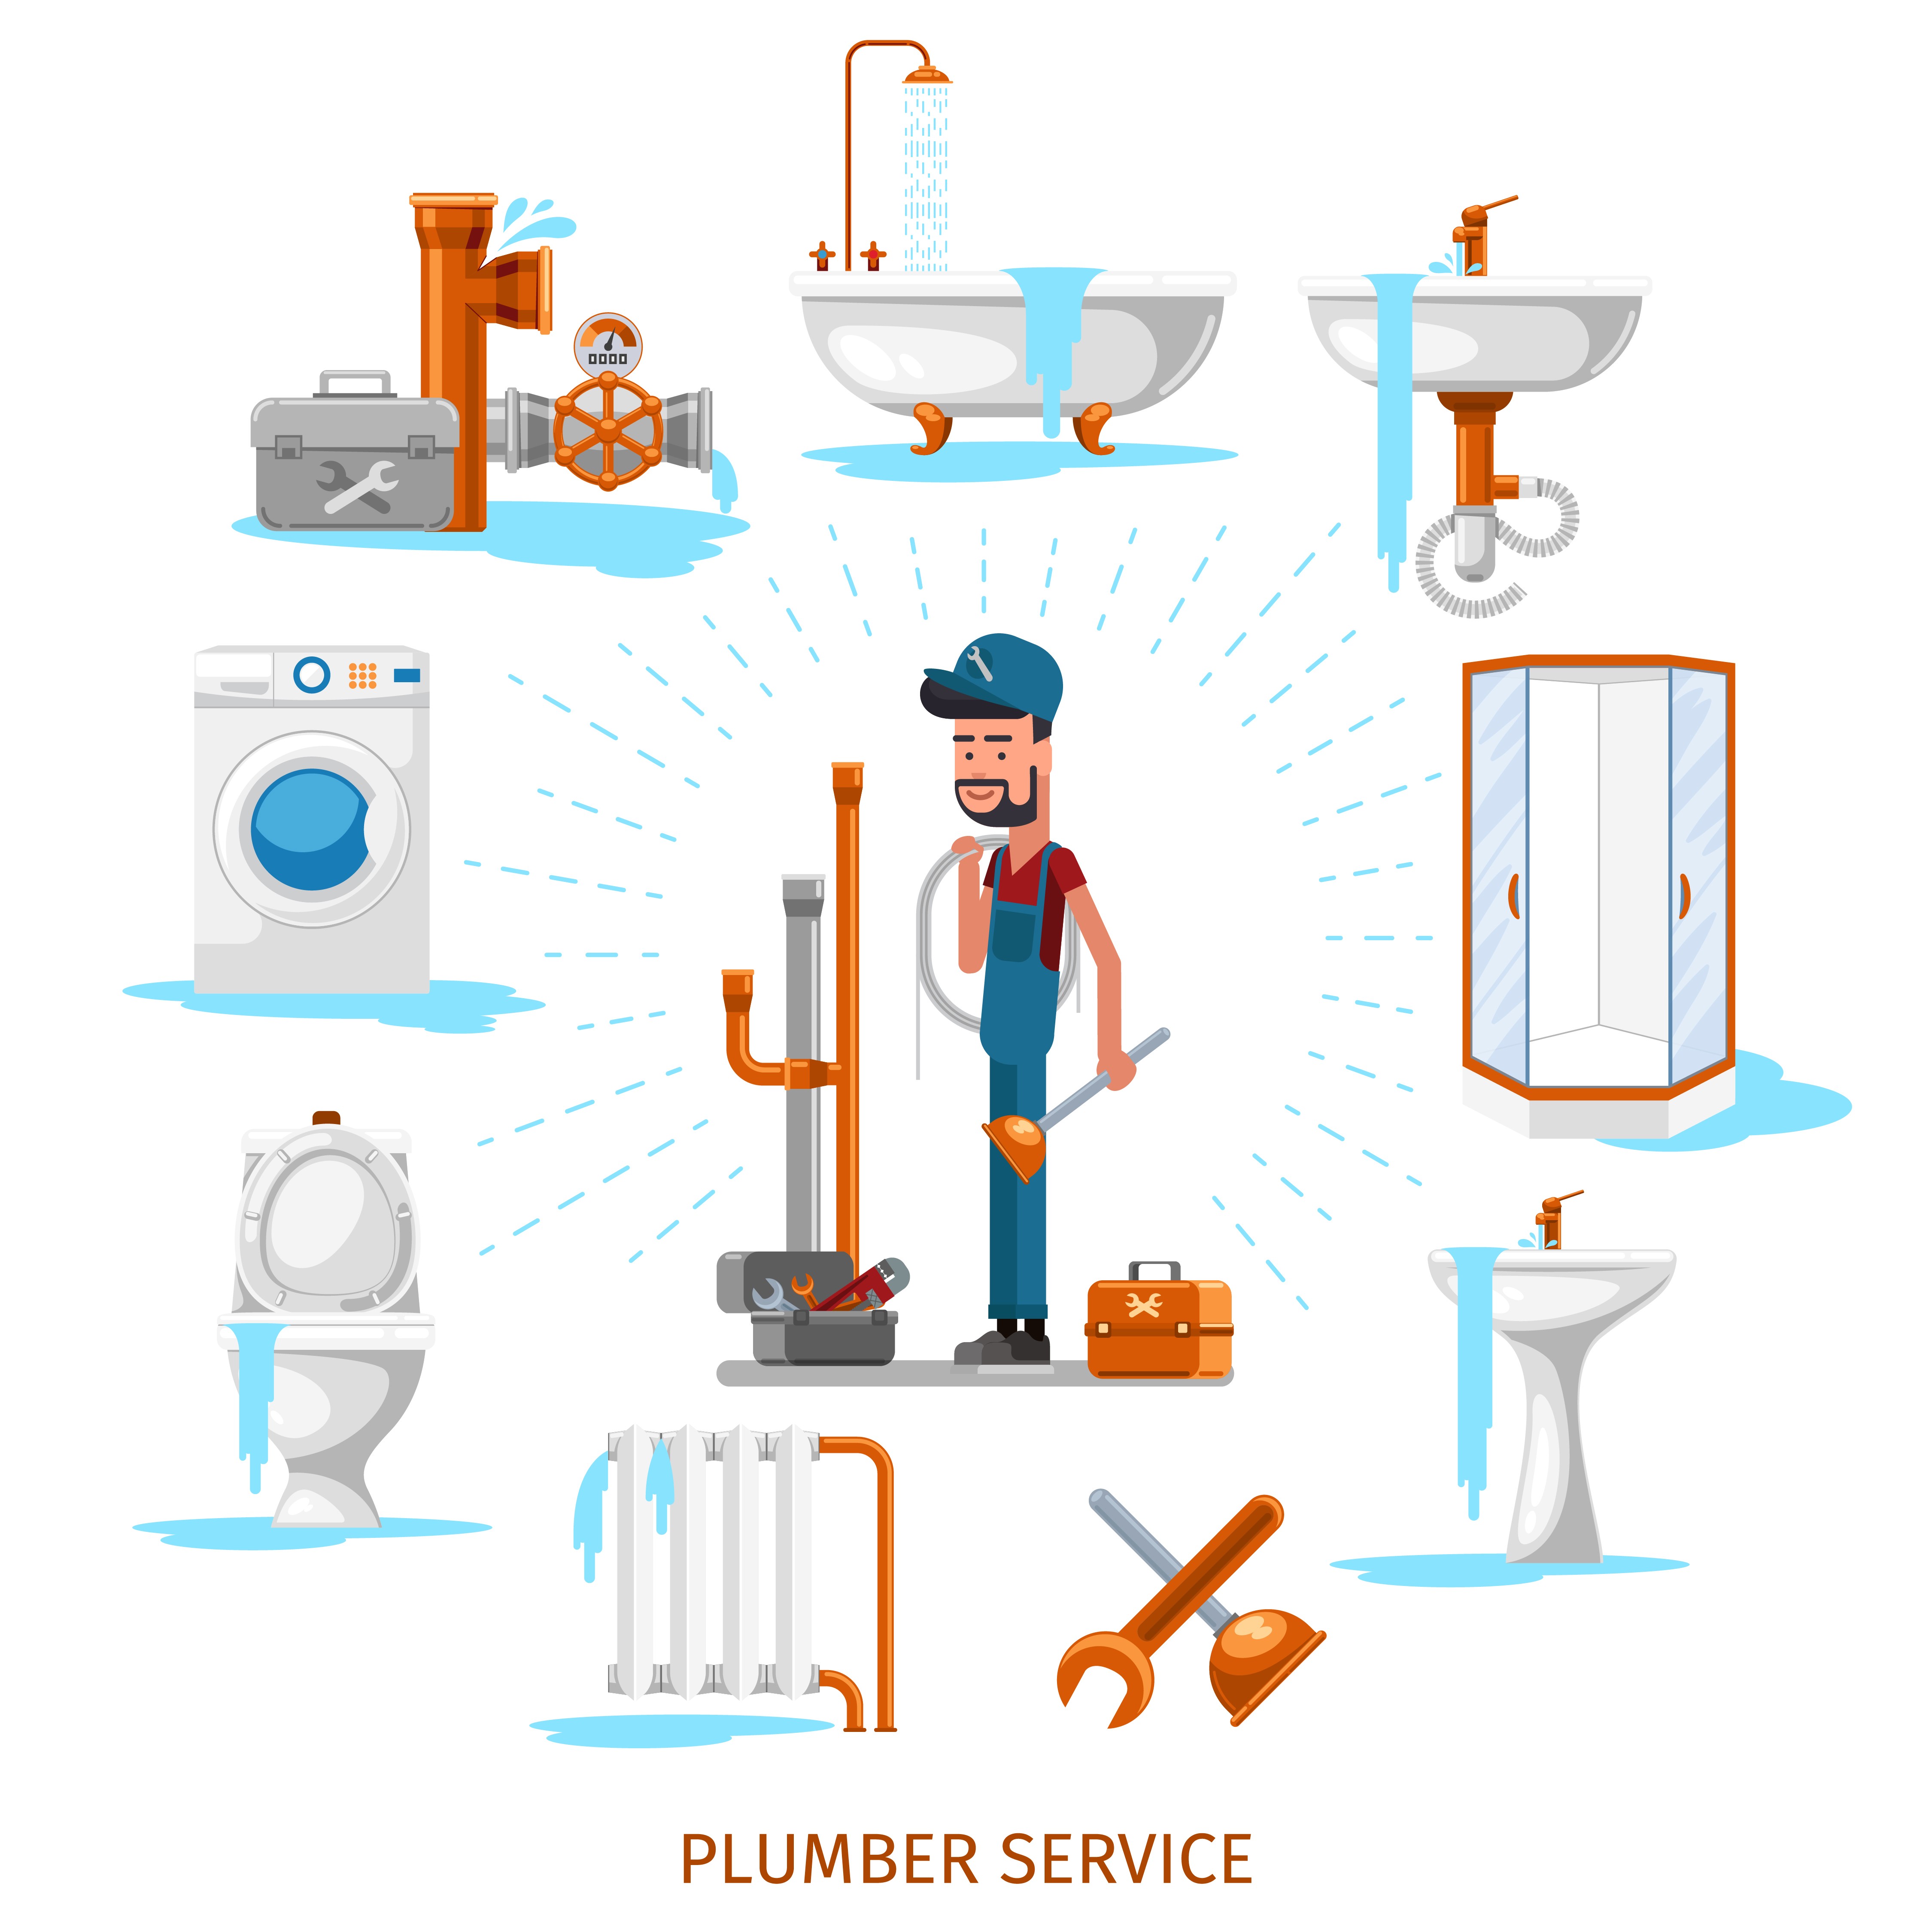 When Should You Hire A Blocked Drain Plumber?